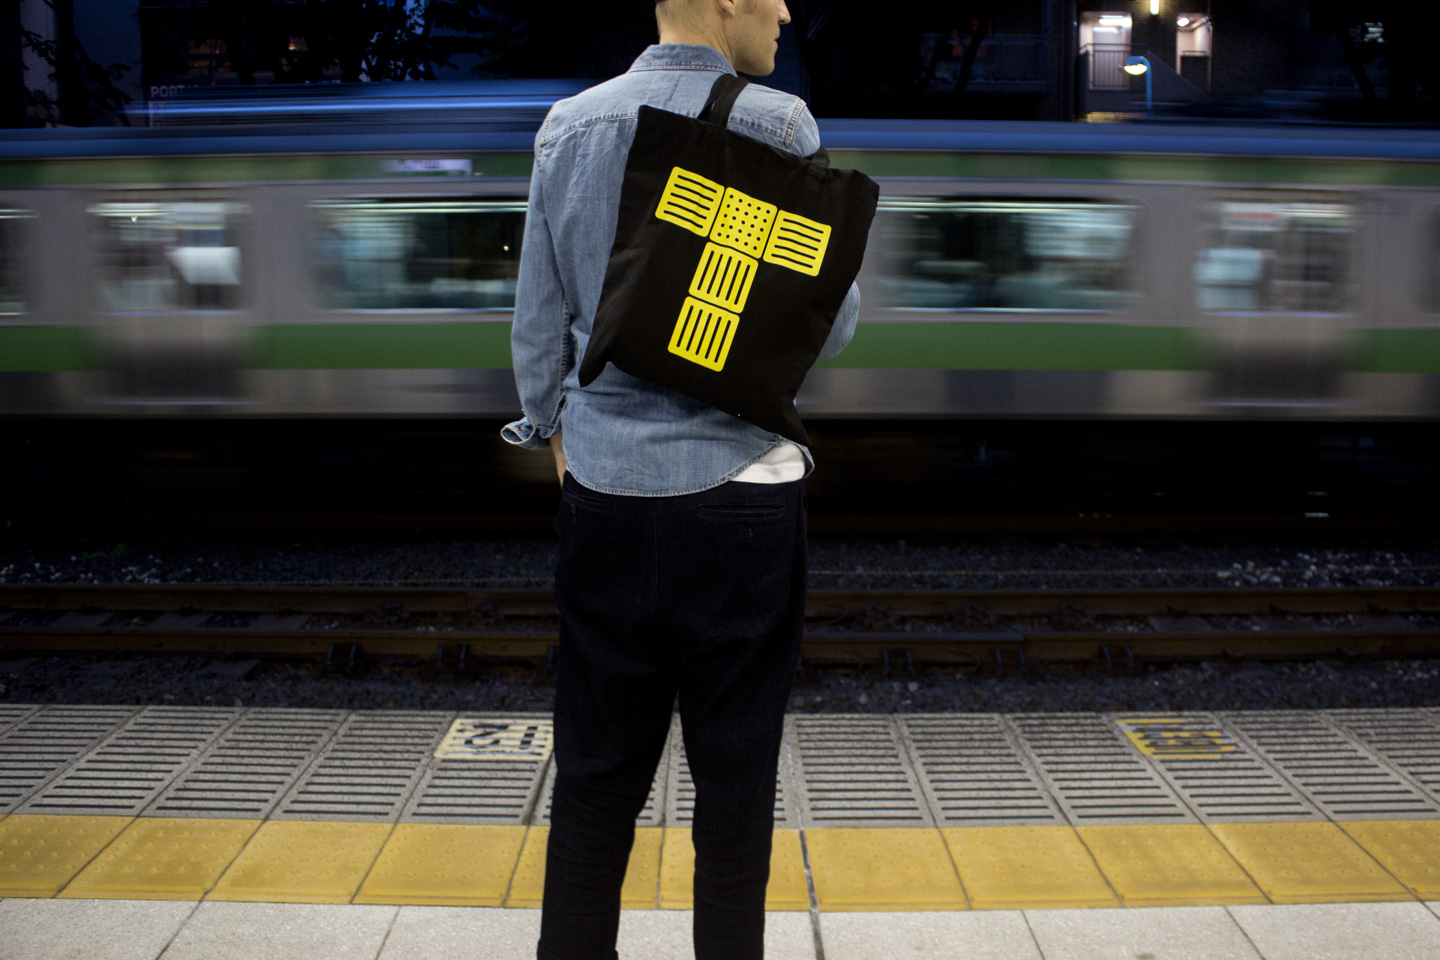 Tokyo Signs - Products inspired by the streets of Tokyo - Tactile Paving Tote Bag